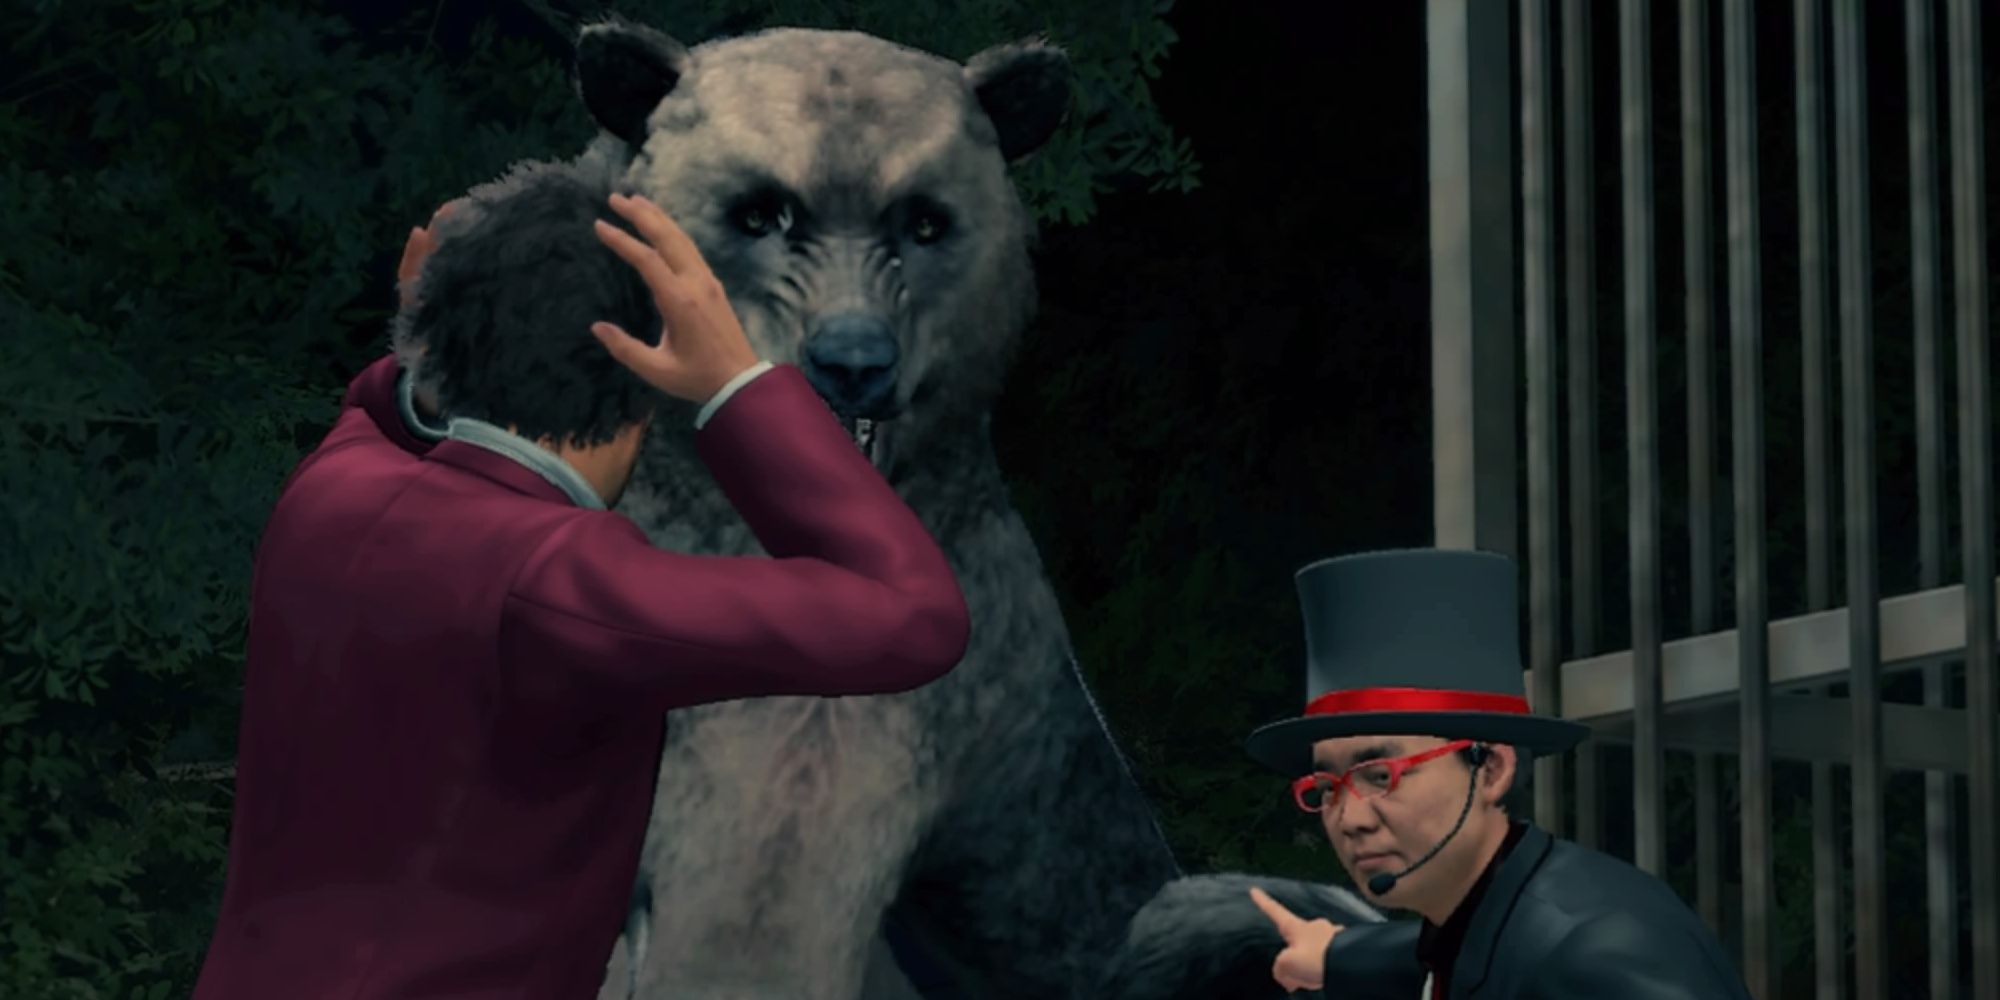 Ichiban startled by a large bear